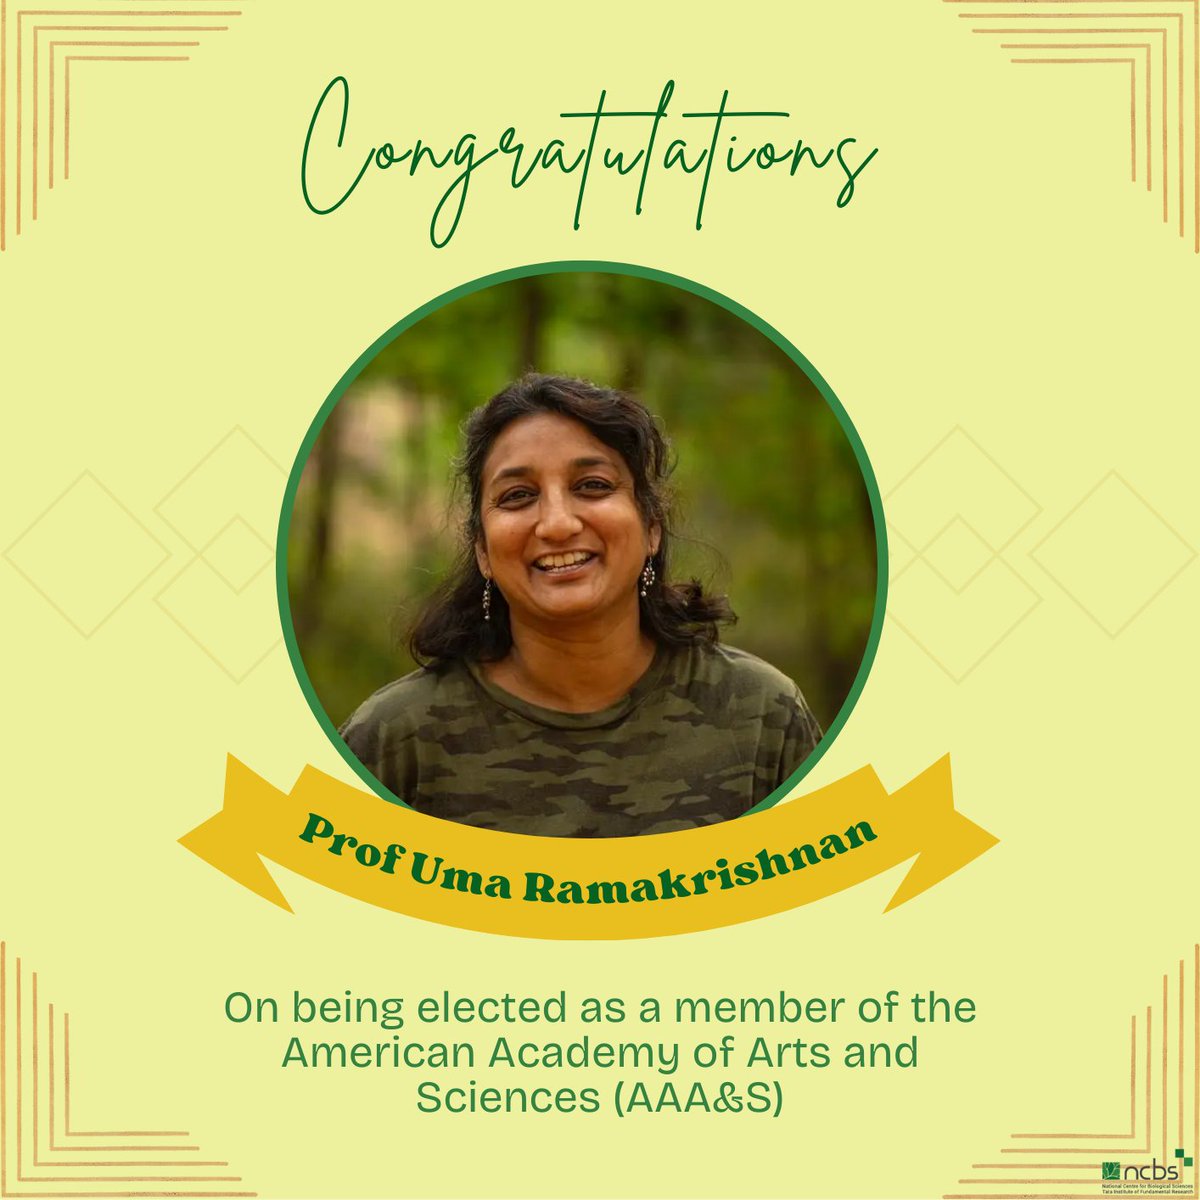 🌟We are very excited to share that Prof. Uma Ramakrishnan from NCBS has been elected as a Member of the American Academy of Arts of Sciences 🌟This is a prestigious international recognition for Prof. Uma, NCBS and the Indian community of biologists. (1/3)